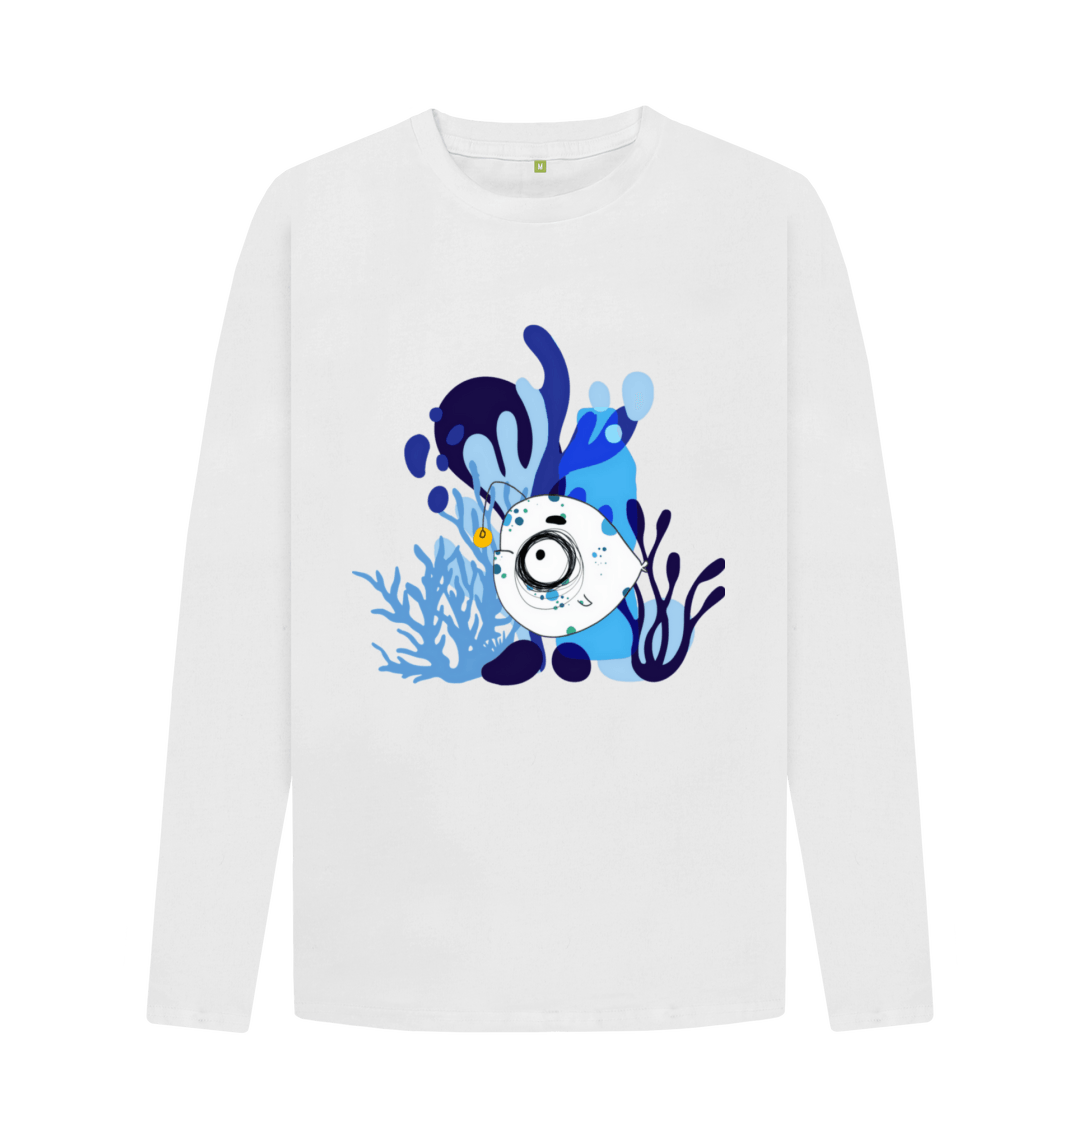 Eco-Friendly Angler Fish Coral Long Sleeve T-Shirt - Sustainable Ocean Theme  (Men's)